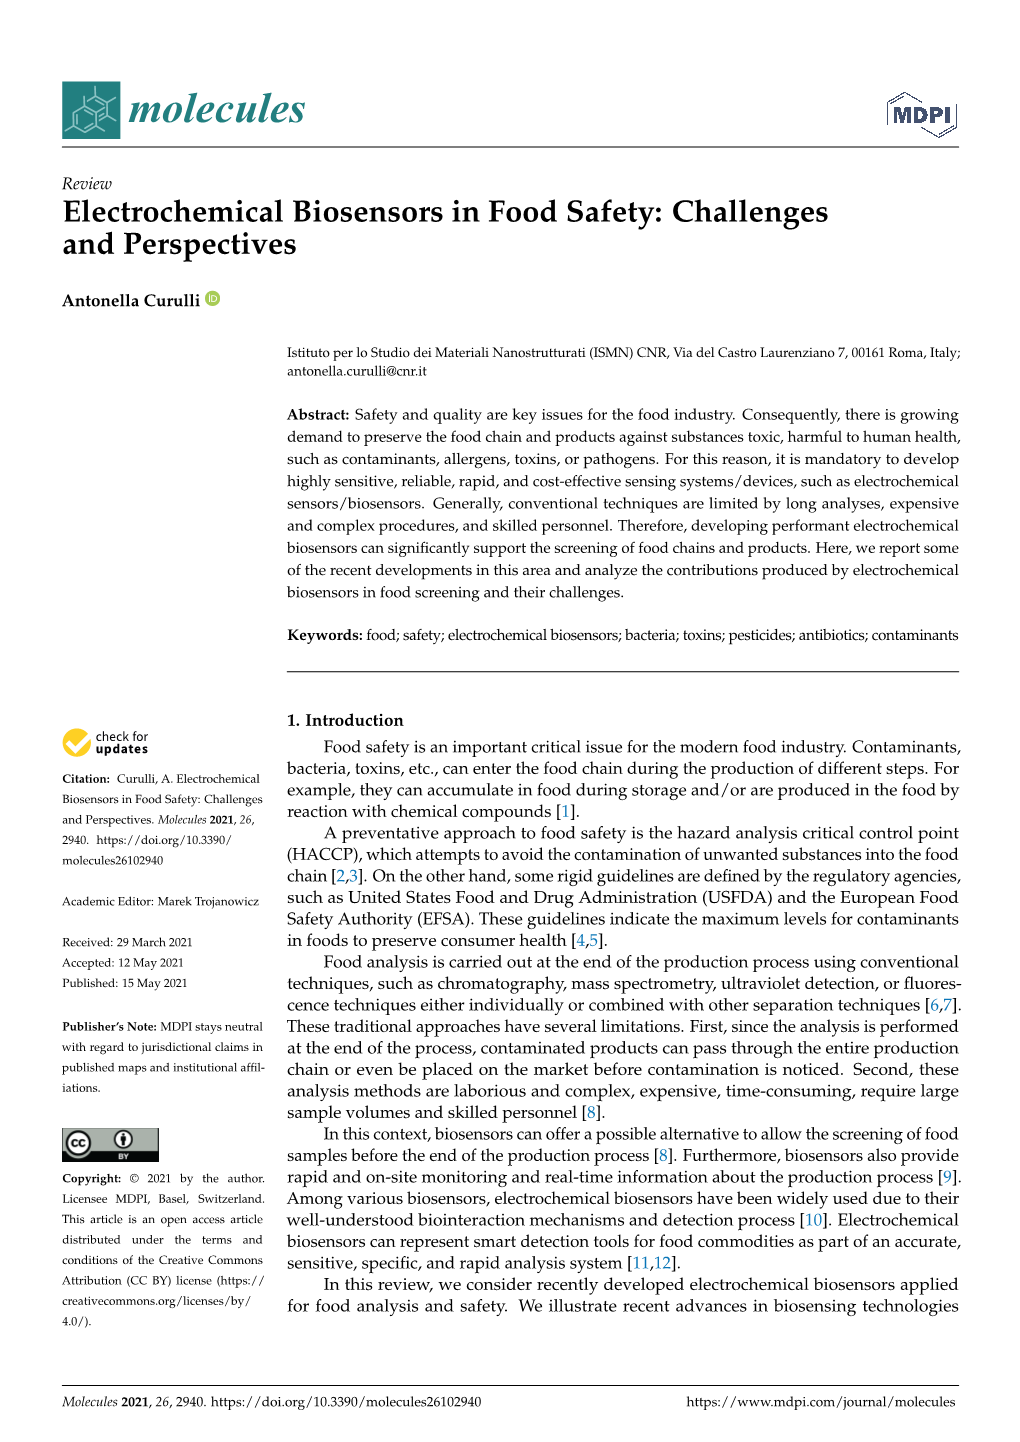 Electrochemical Biosensors in Food Safety: Challenges and Perspectives